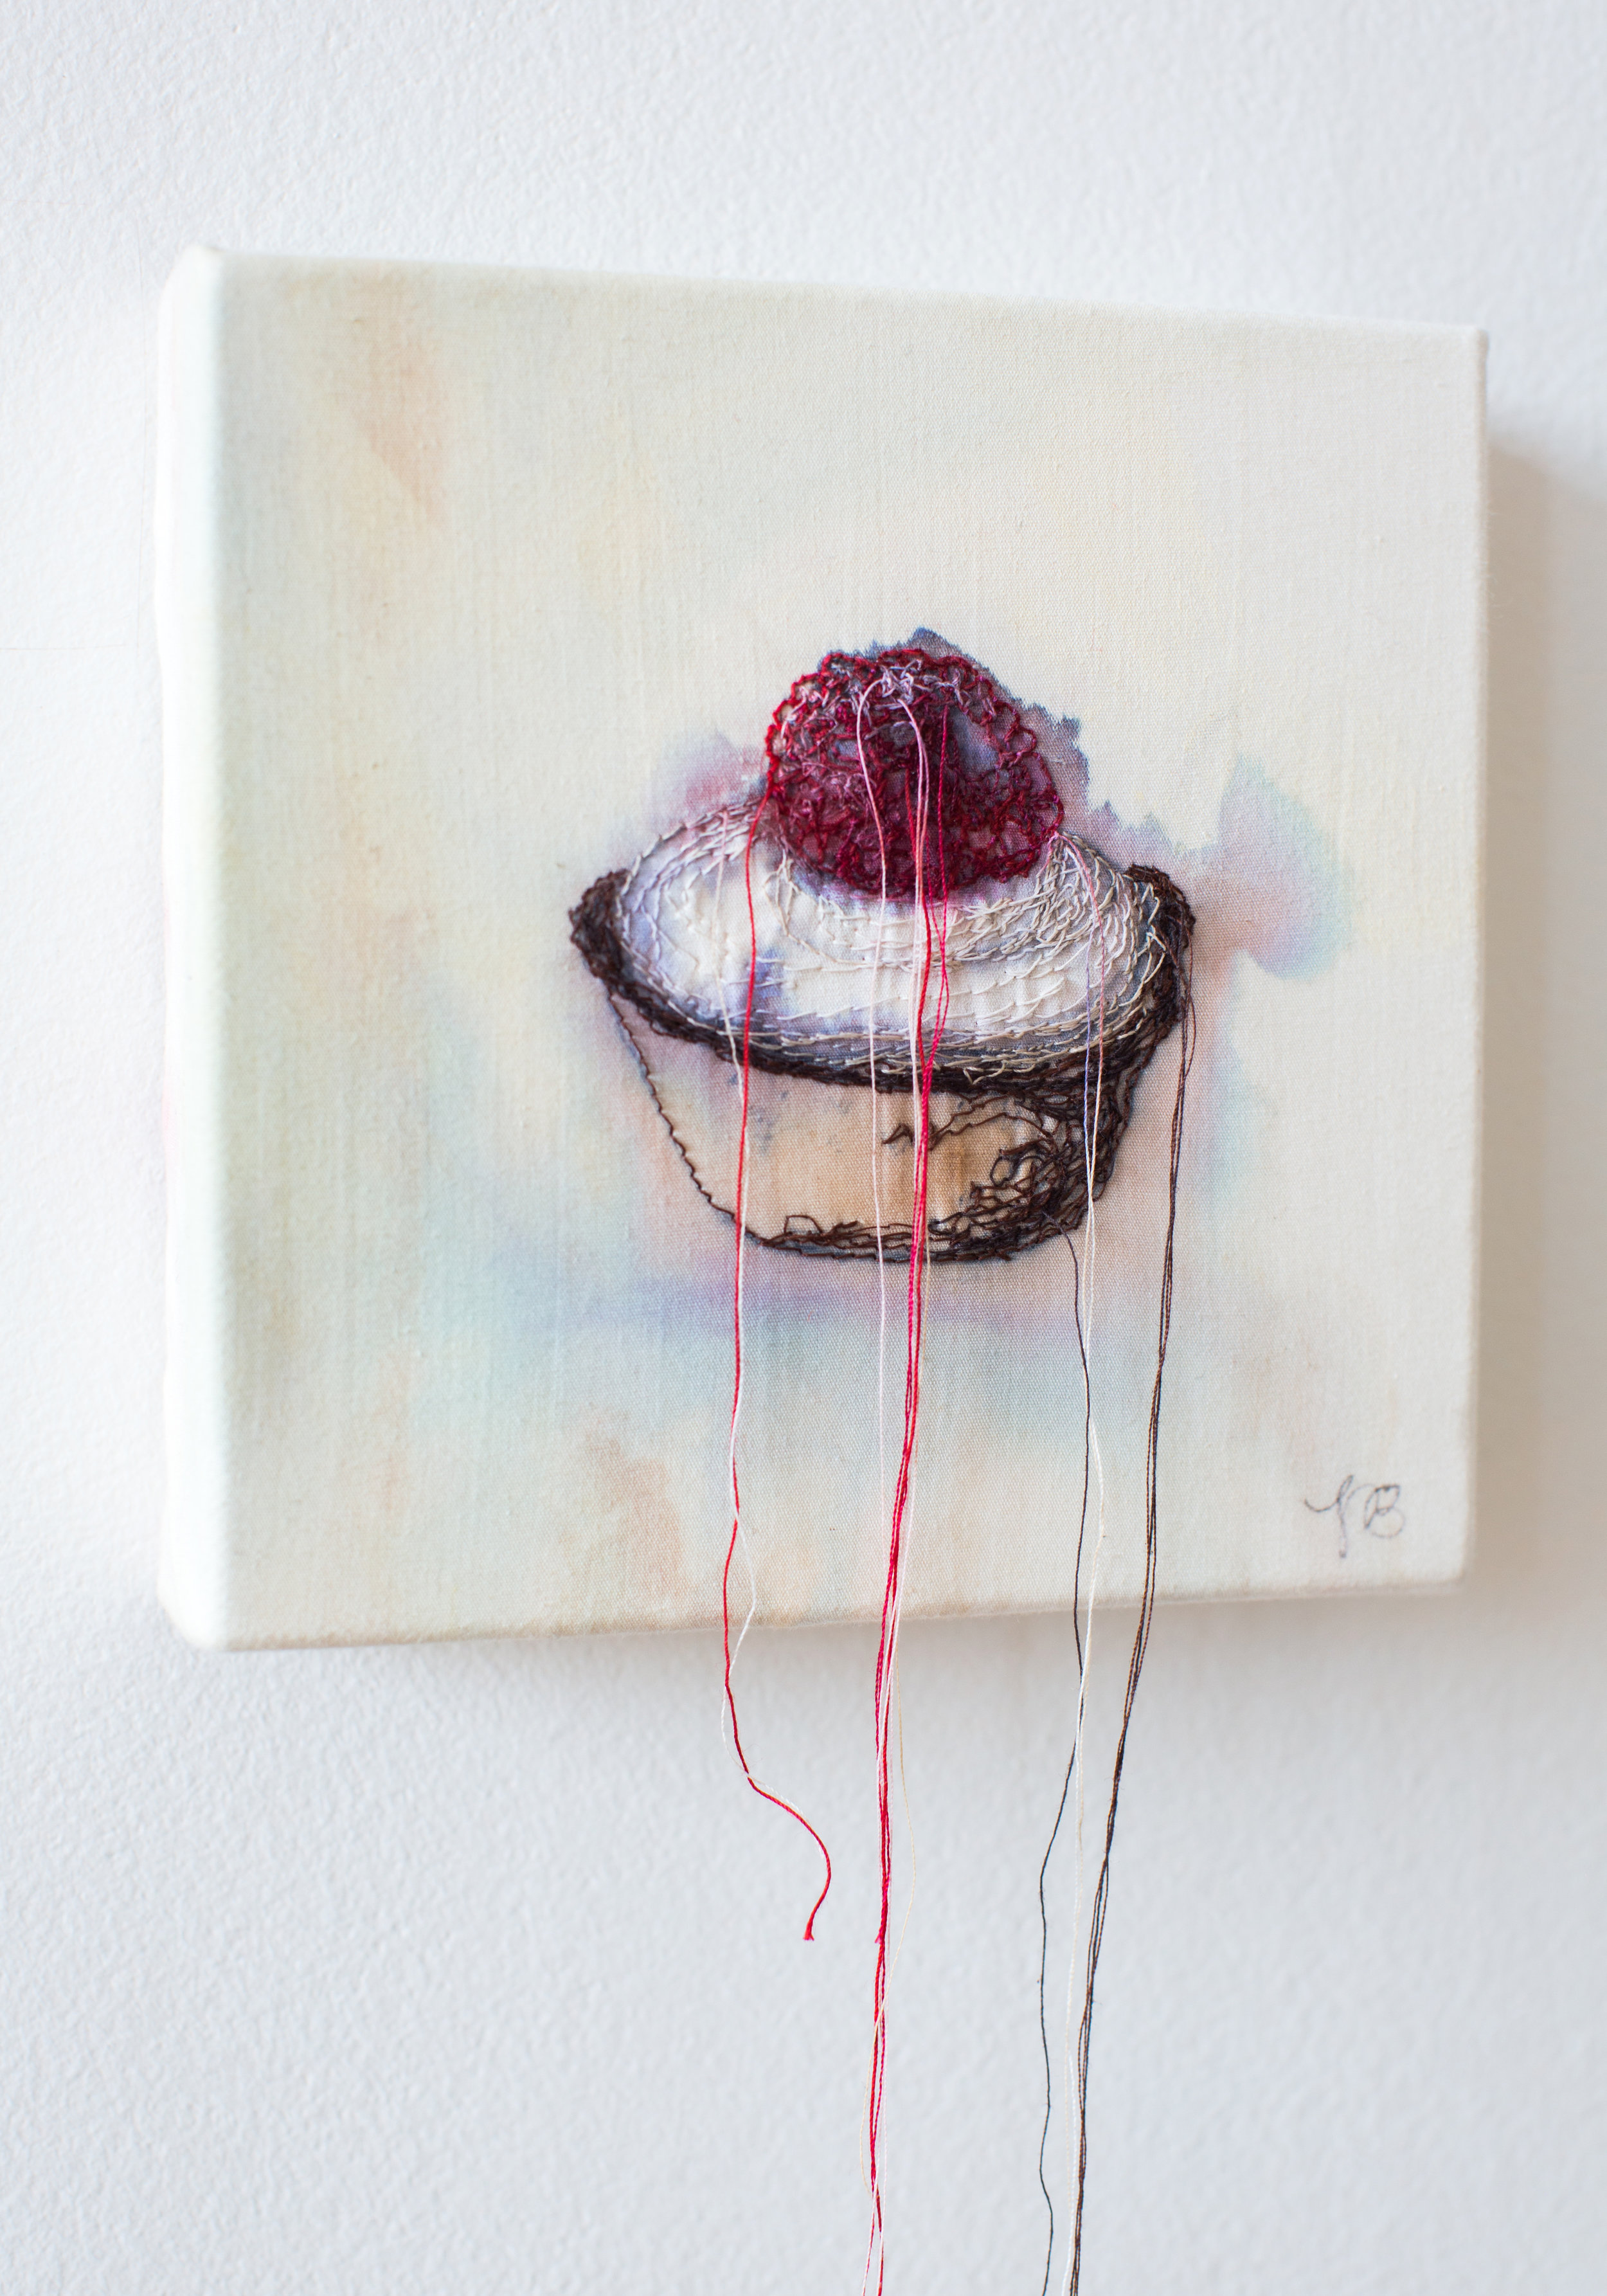   Petit Four avec Framboise (Detail)   Sewing/ Embroidery with Watercolor and India Ink on Muslin  2013  Photo:  Julie Dietz Photography  